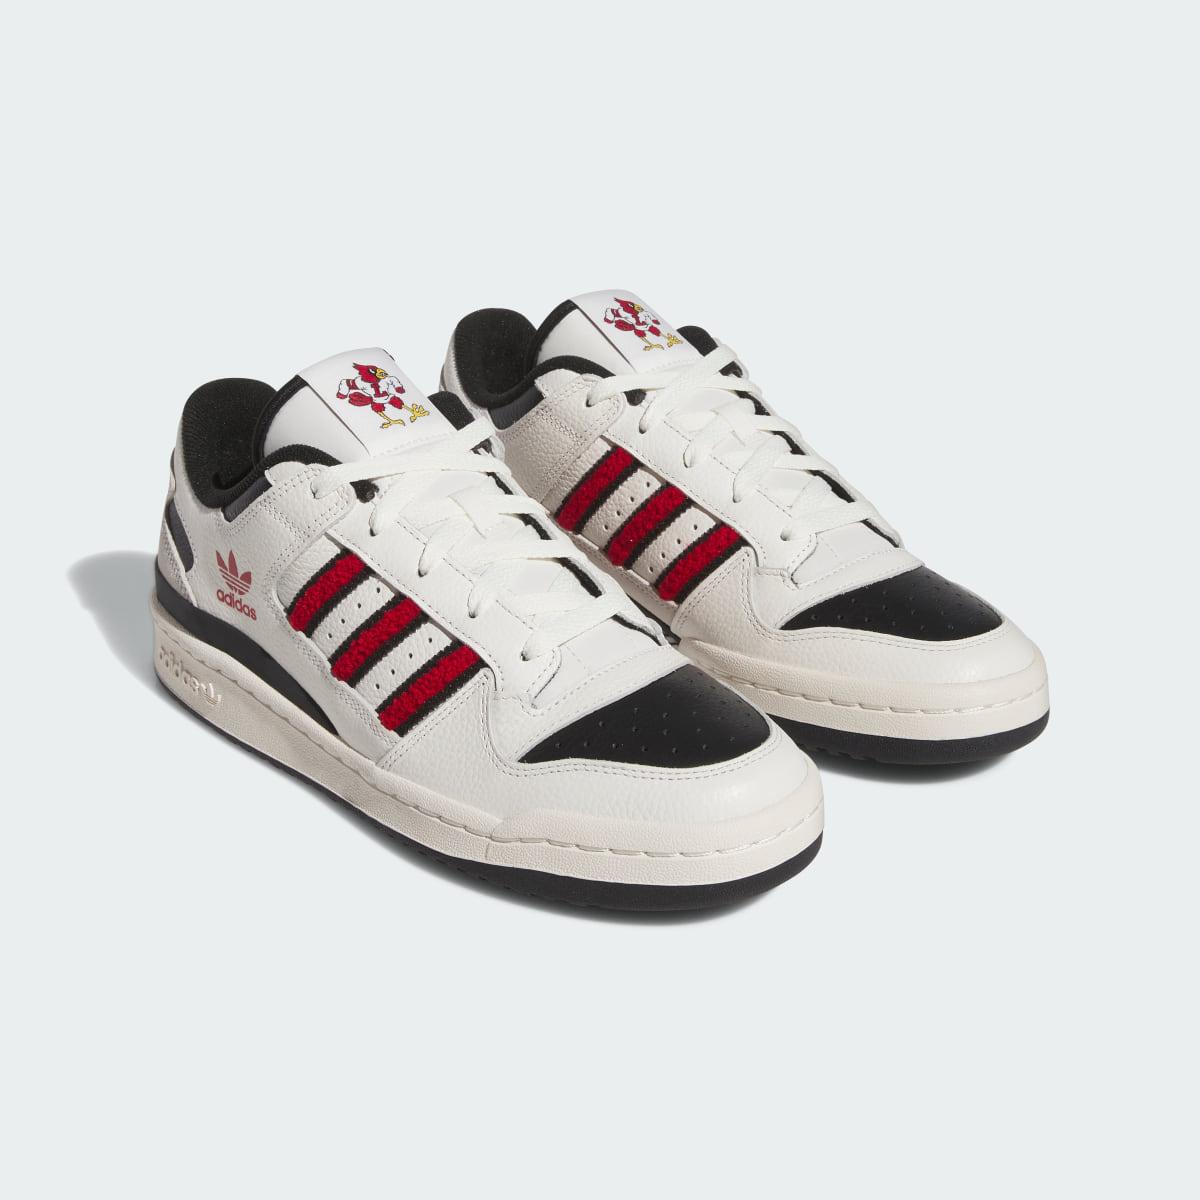 Adidas Louisville Forum Low Shoes. 5